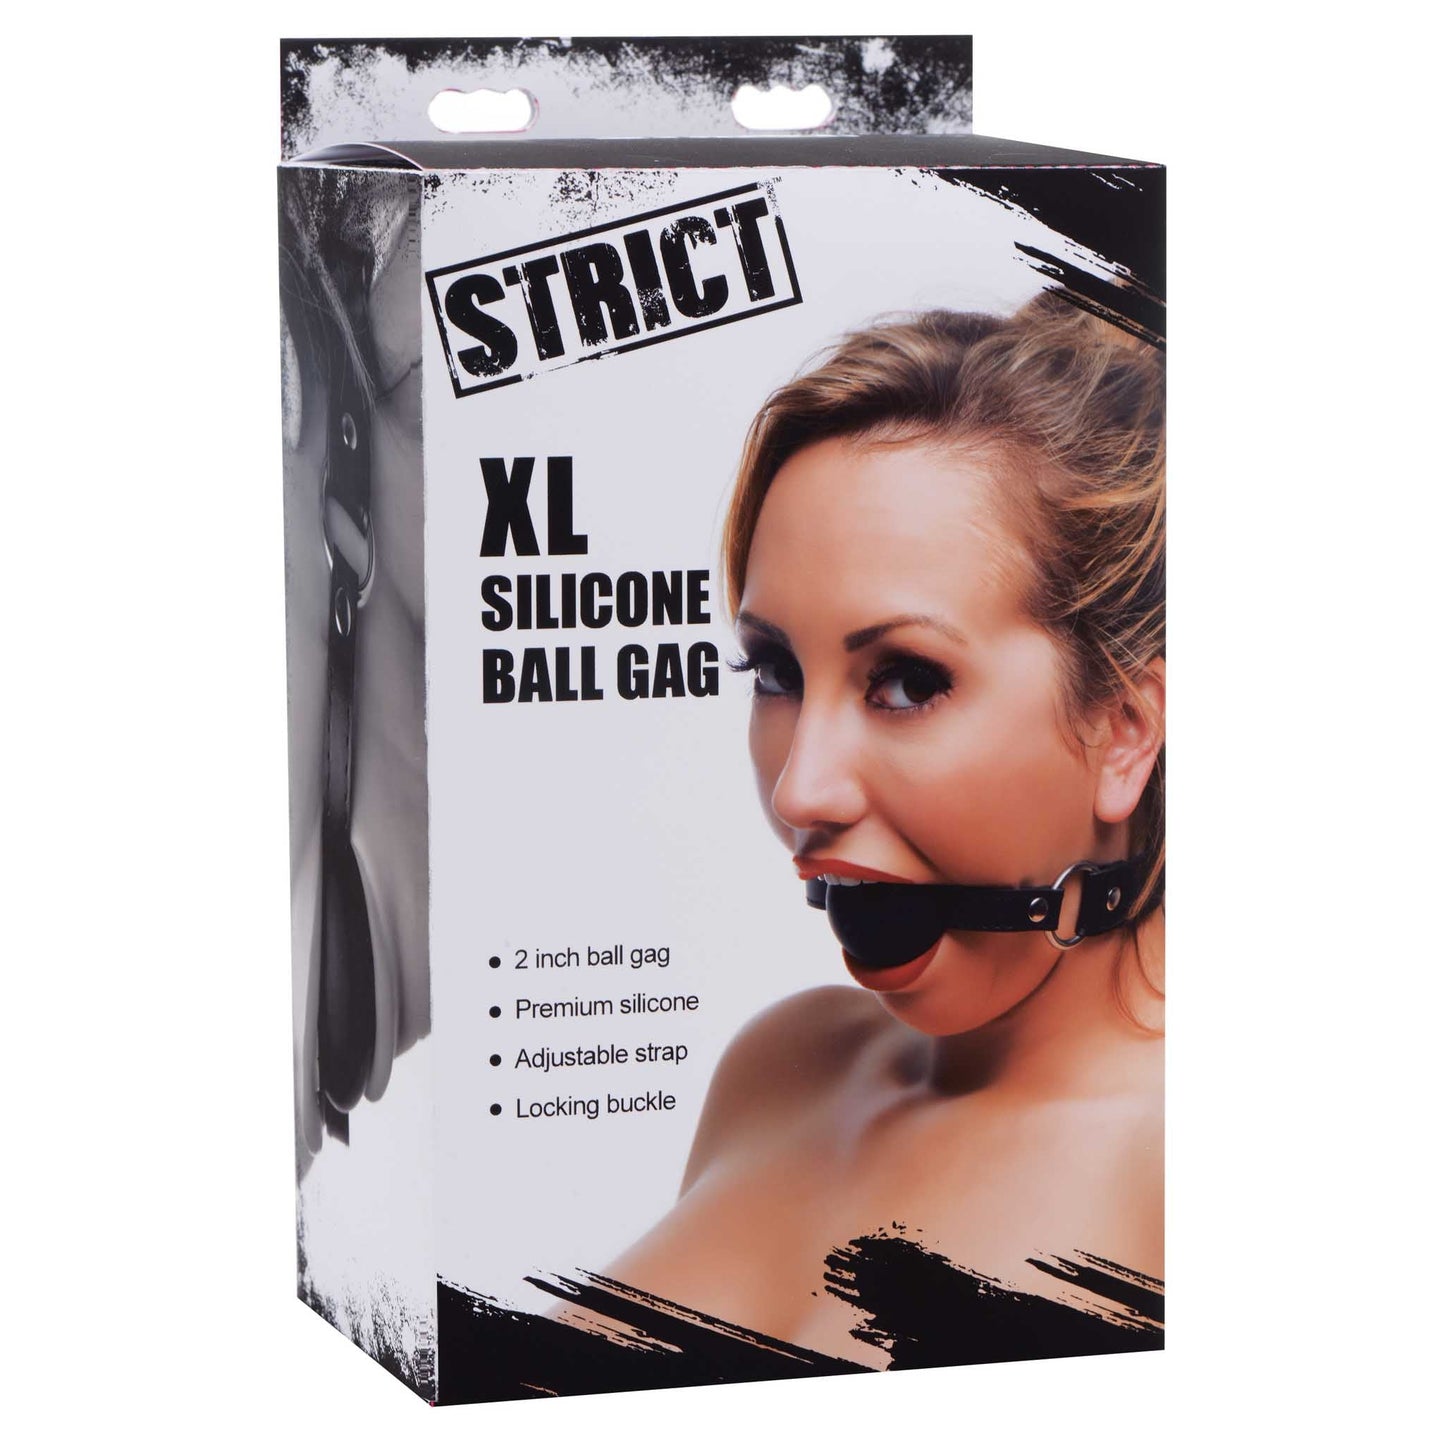 Strict XL Silicone Gag Ball 2in - Black